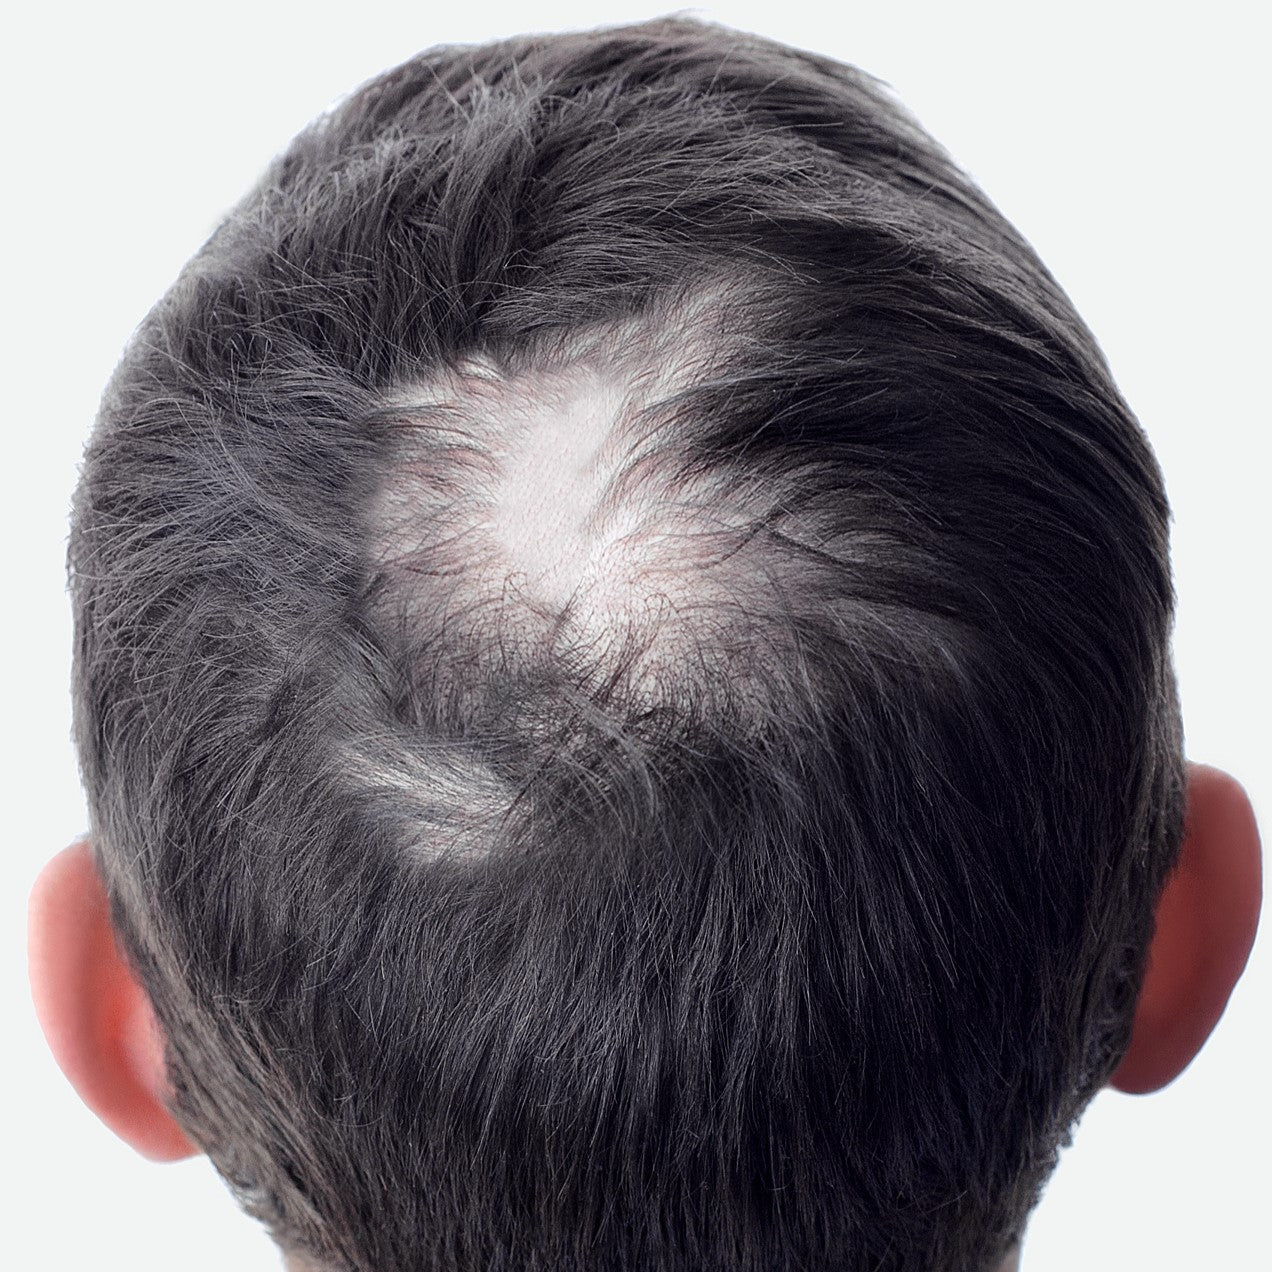 crown hair thinning example